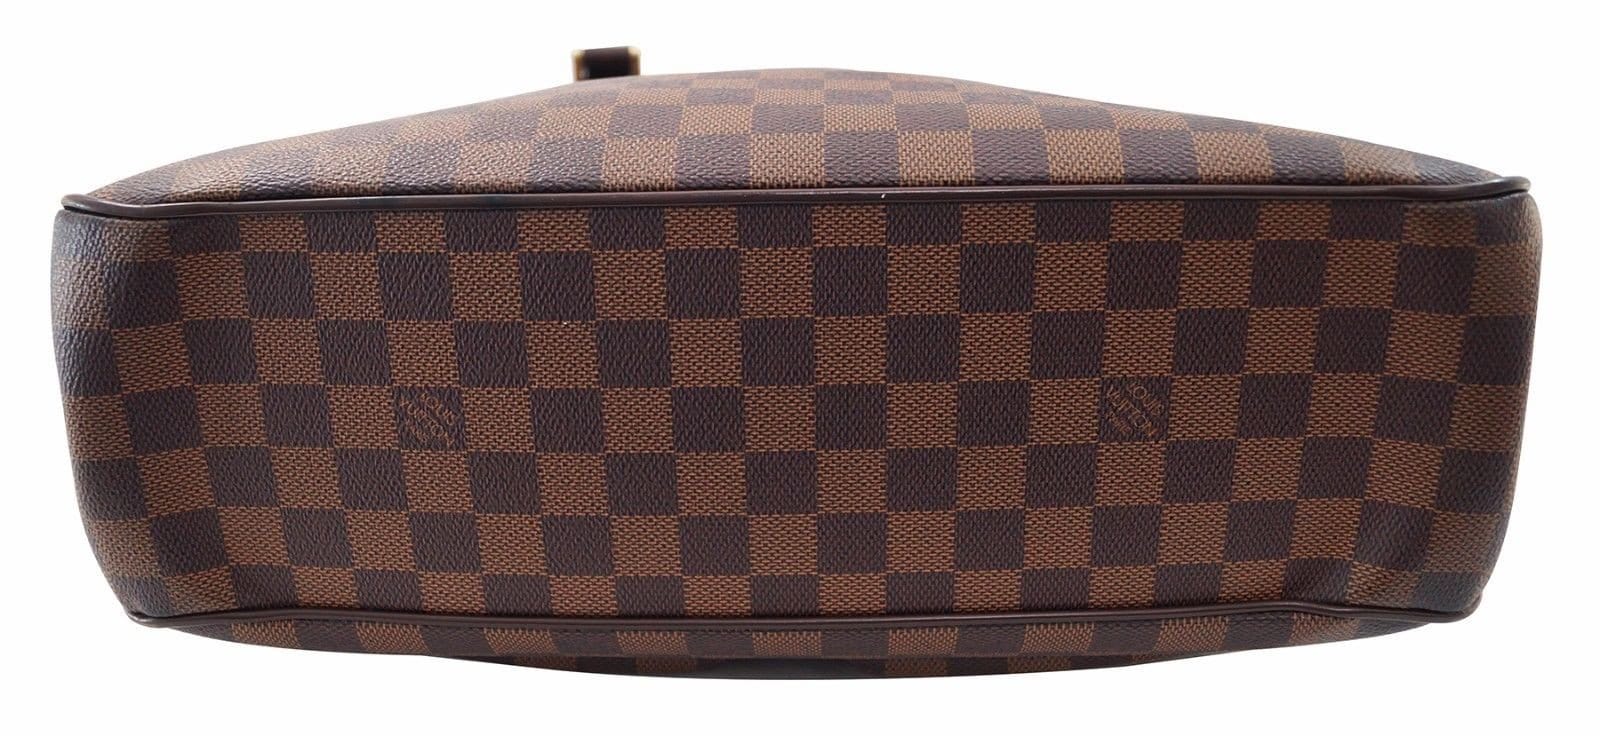 Manhattan Louis Vuitton Uzes tote bag with front pockets in damier